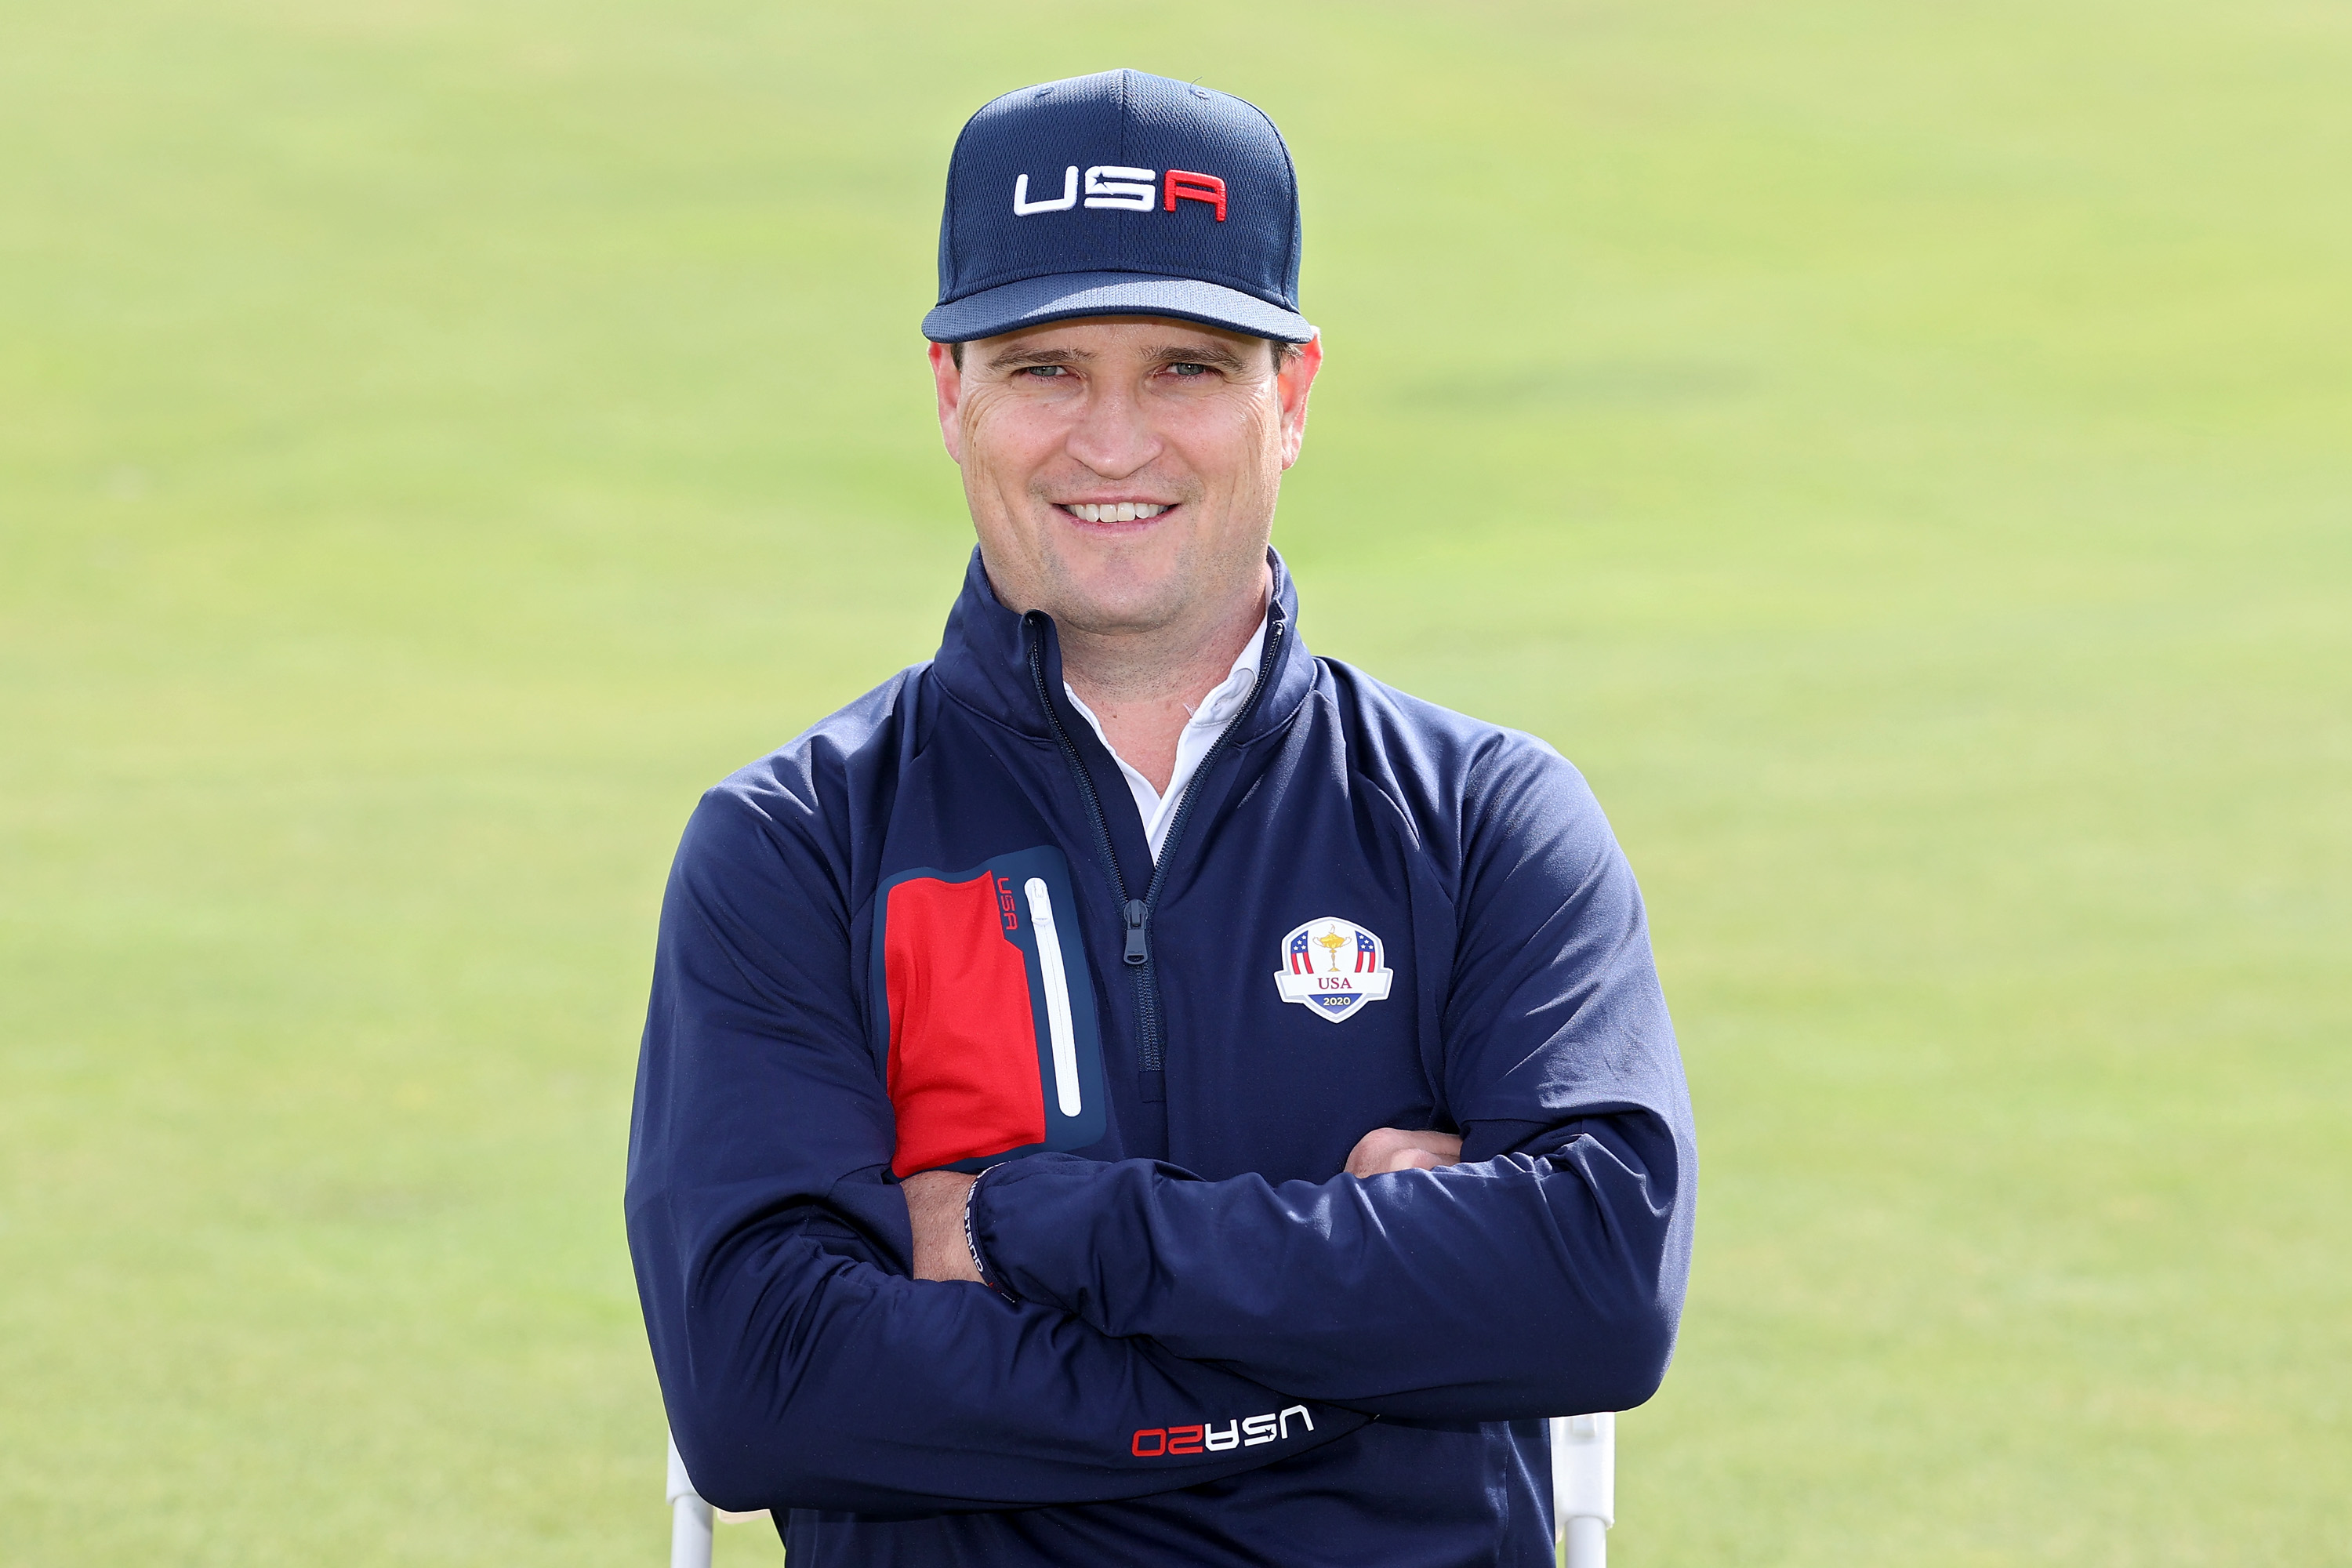 Report: Zach Johnson Replacing Steve Stricker as US Ryder Cup Captain